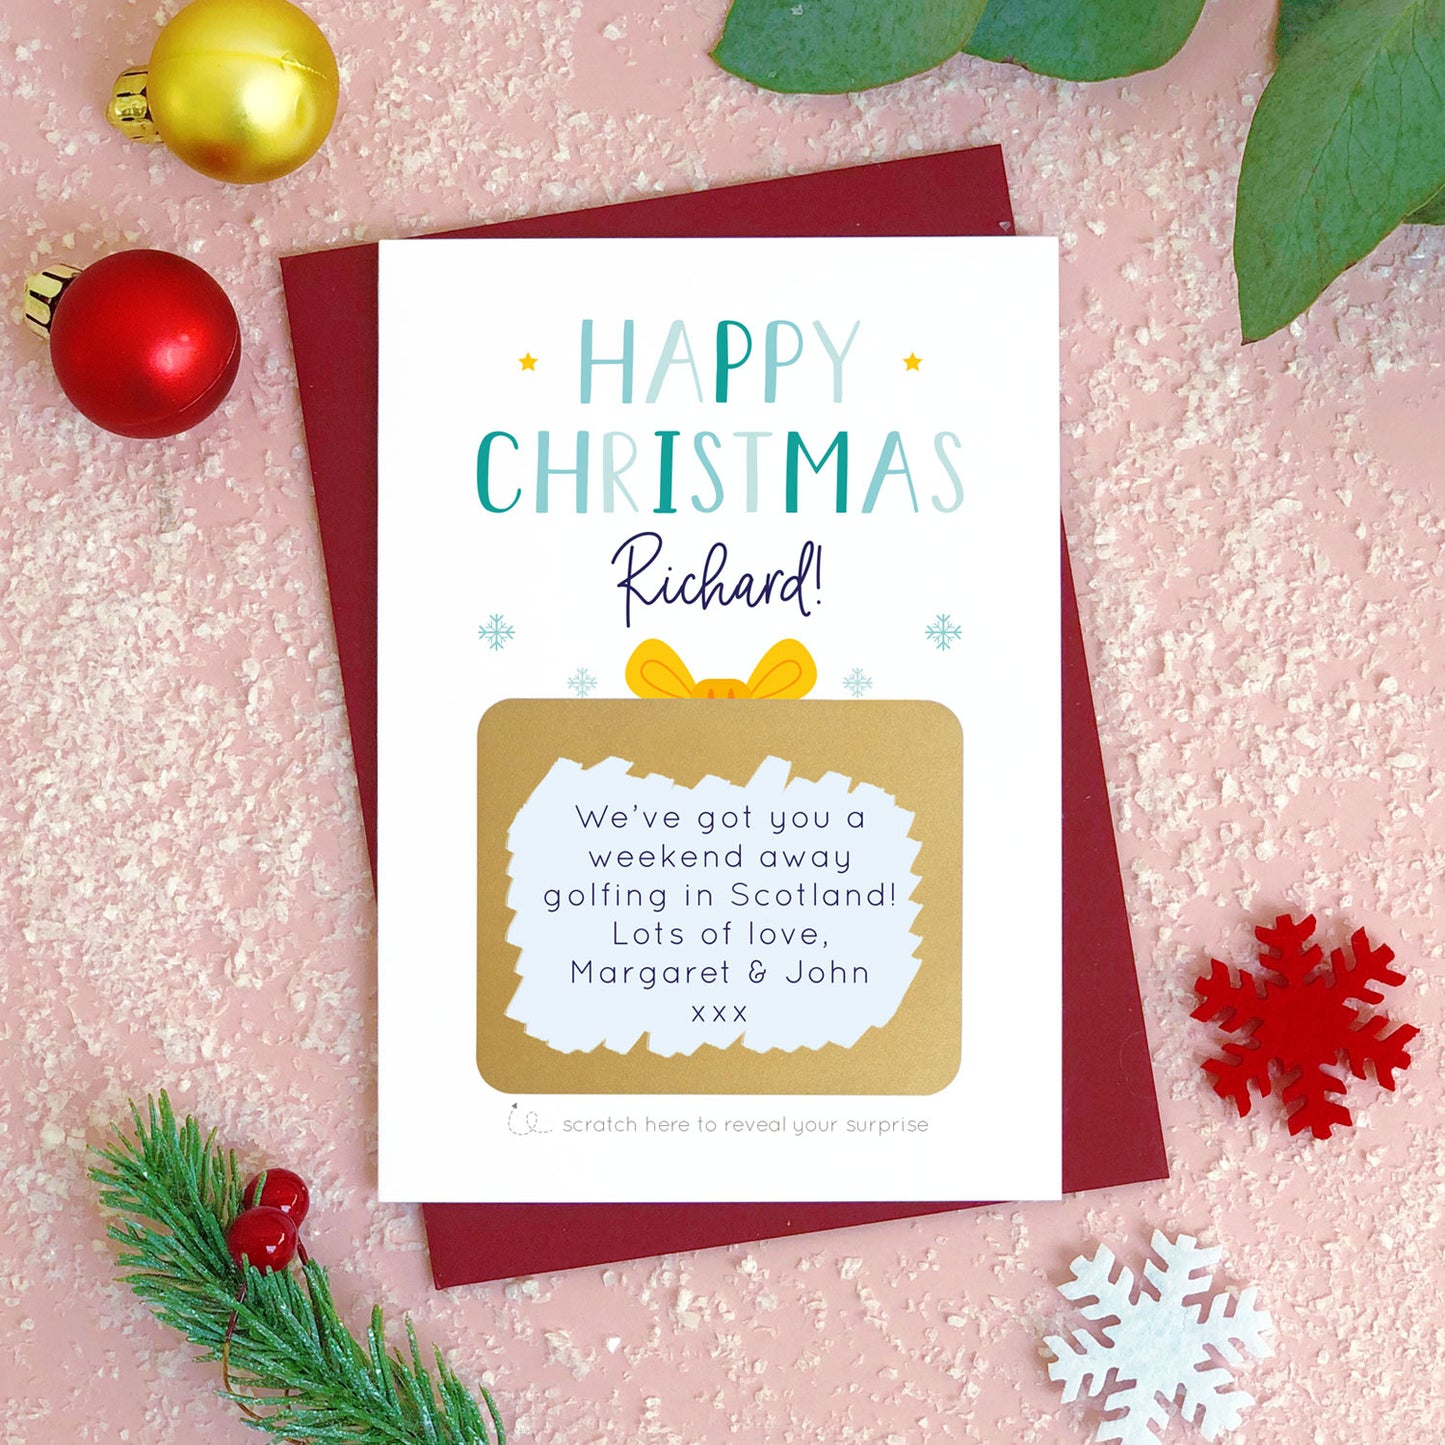 A personalised present christmas scratch card photographed flat lying on a red wine coloured envelope on a pink surface surrounded by fake snow, baubles and foliage. The gold panel has been scratched away to reveal a personalised message and gift reveal. This is the blue version of the card.